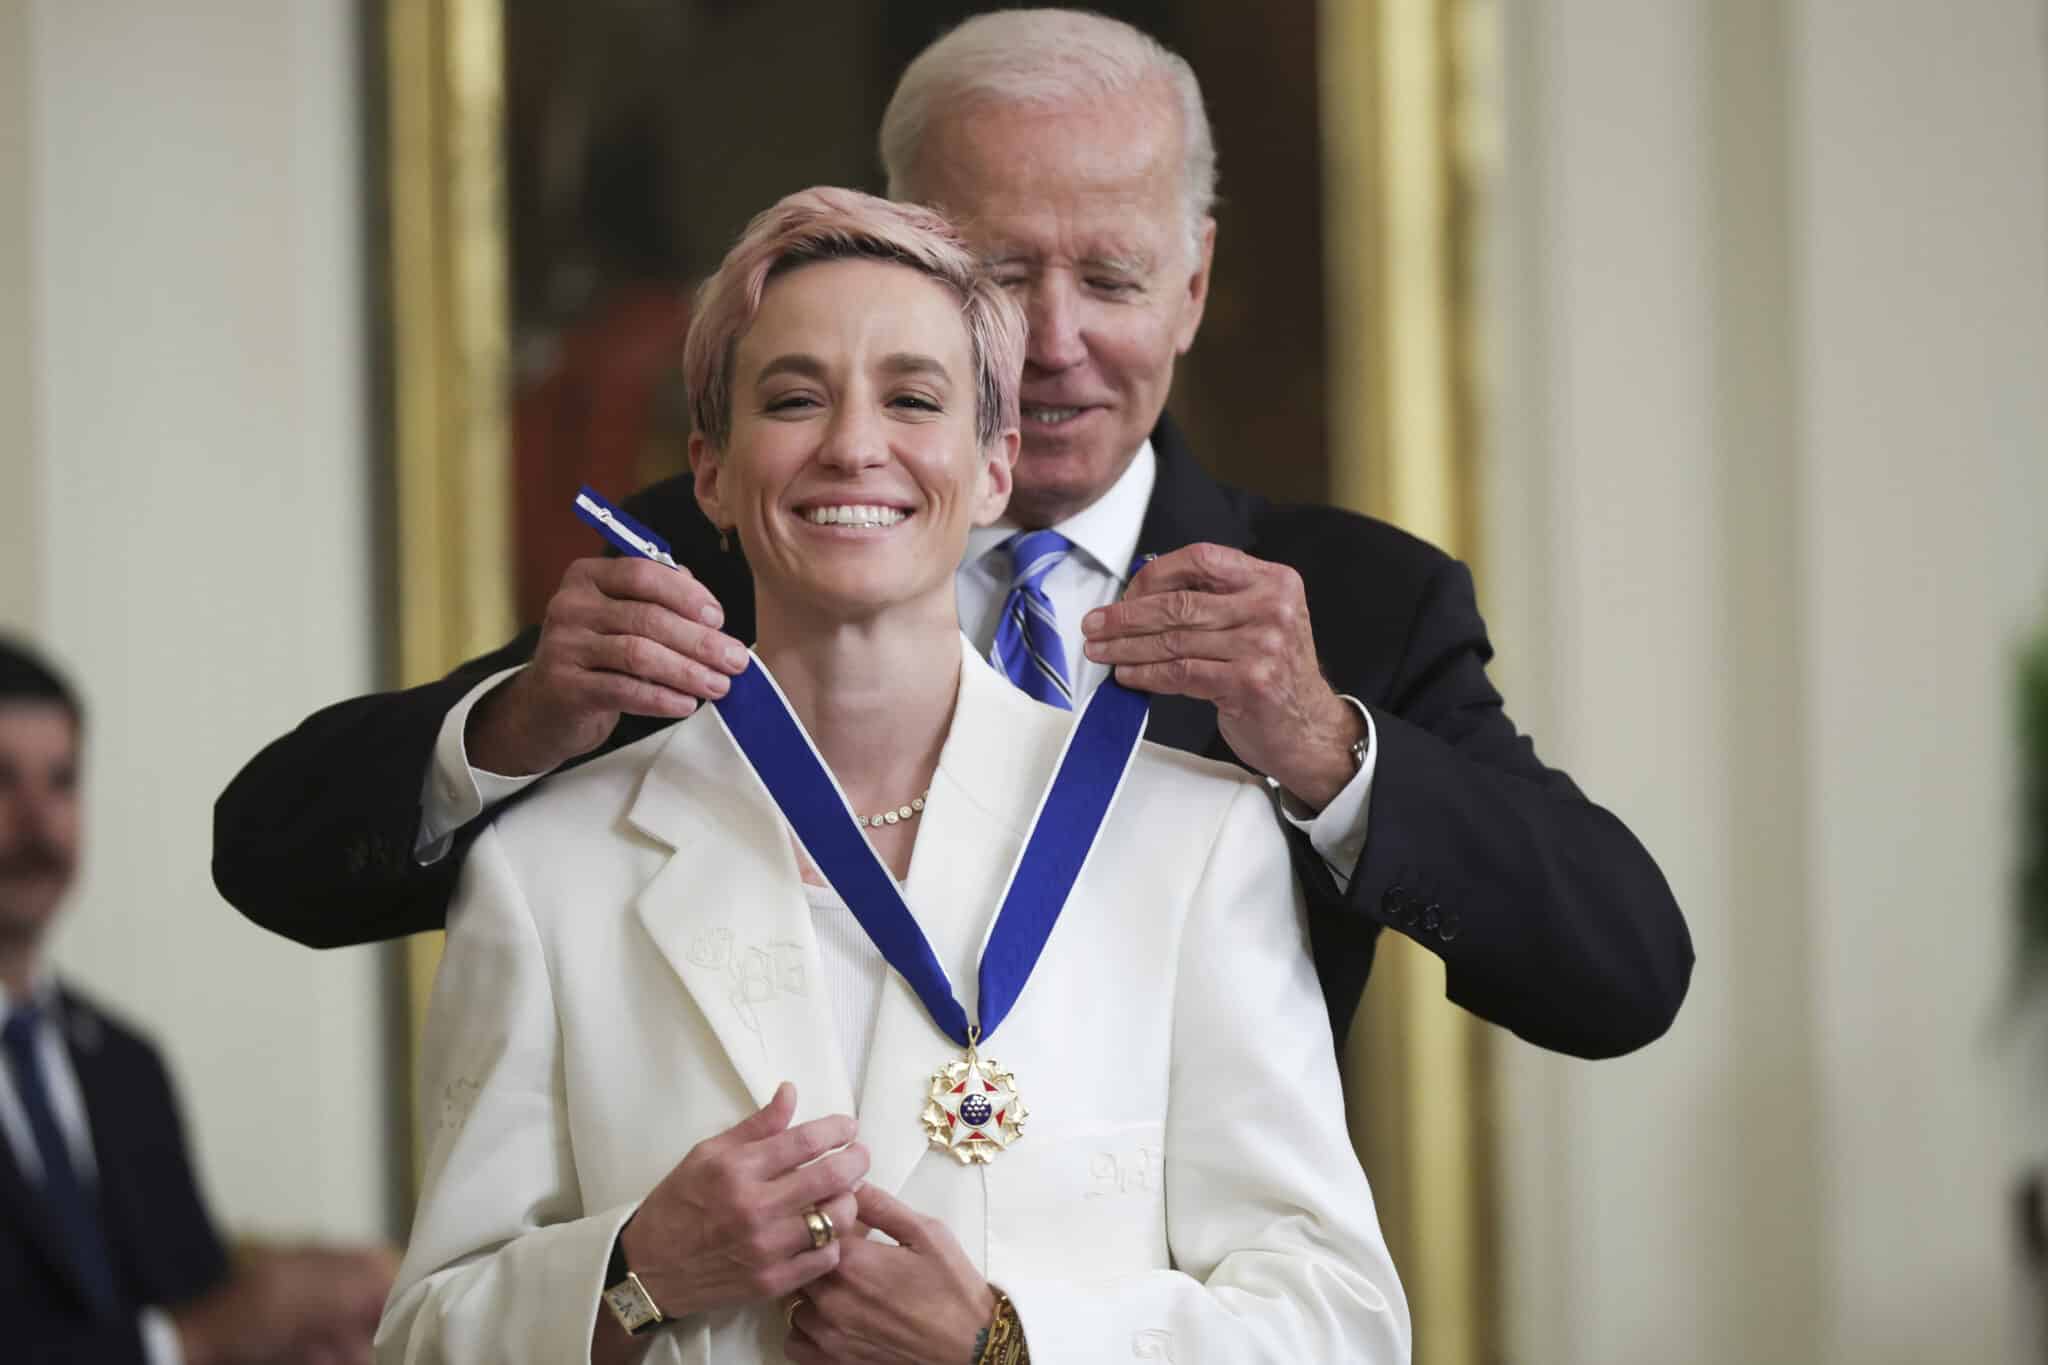 U.S. President Joe Biden presents the Presidential Medal of Freedom to Megan Rapinoe, soccer player and advocate for gender pay equality, during a ceremony in the East Room of the White House July 7, 2022 in Washington, DC. 